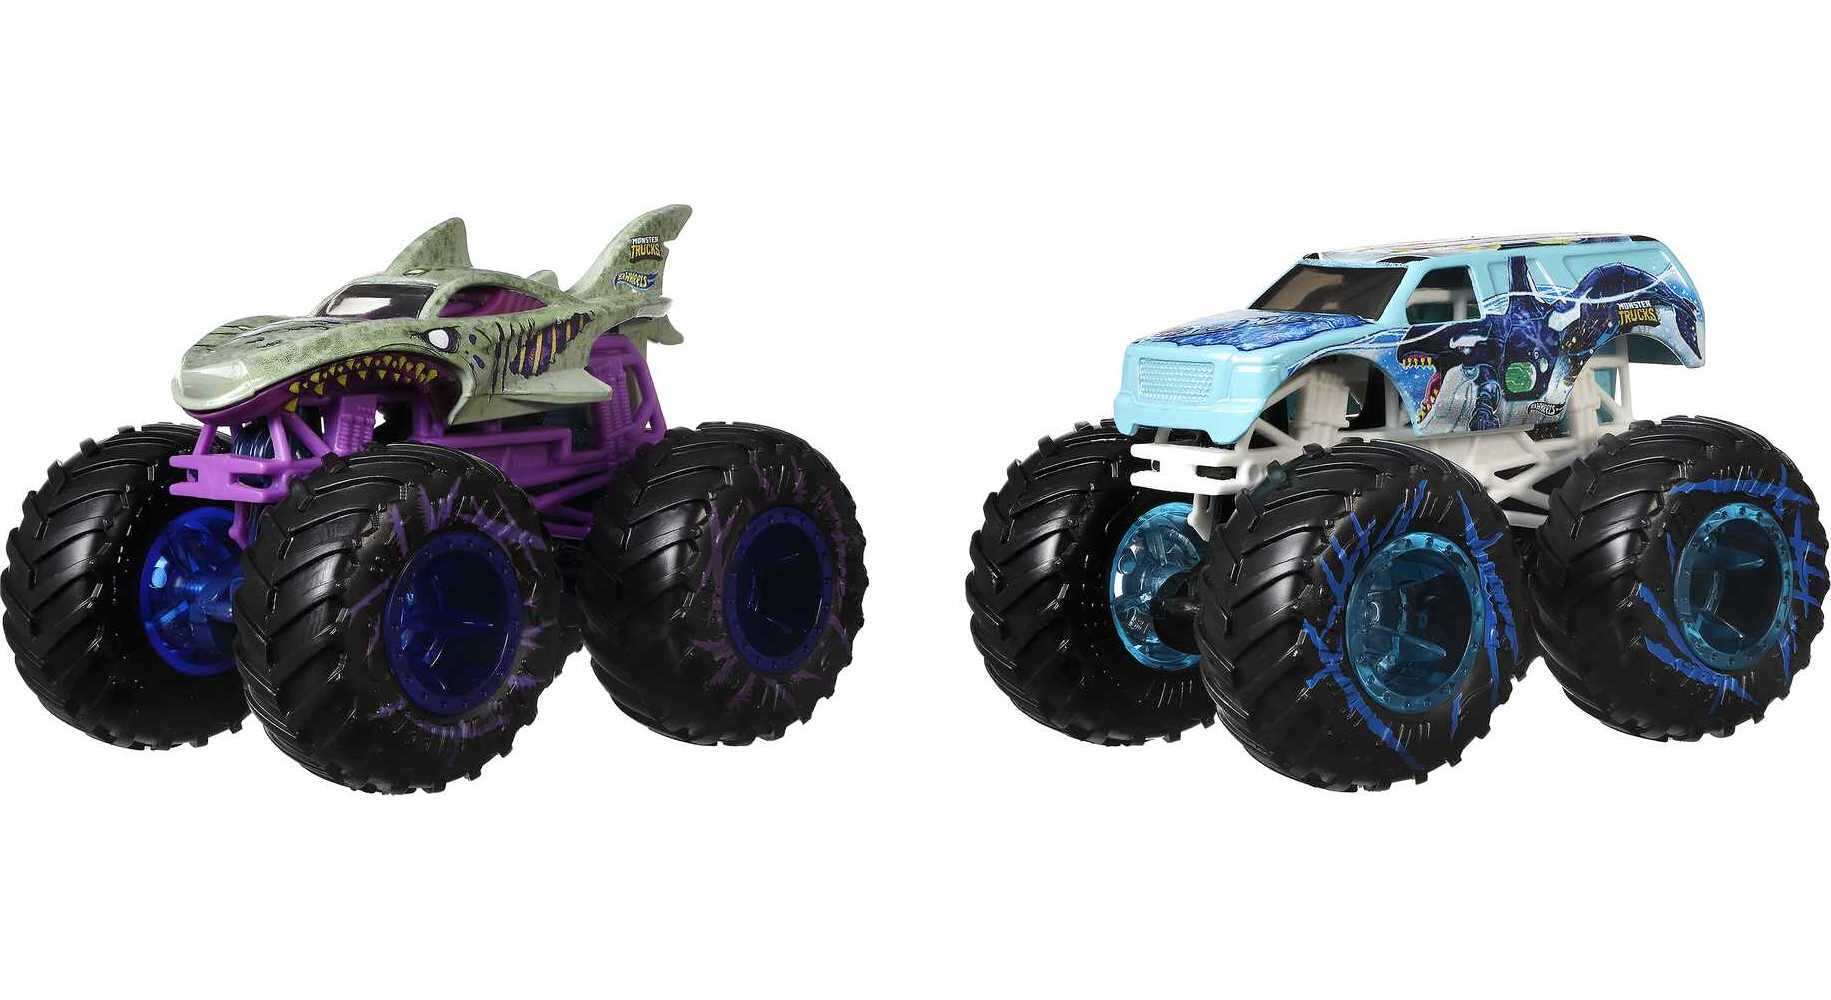 Hot Wheels Monster Trucks Roarin' Rumble 2-Pack of 1:64 Scale Toy Trucks (Styles May Vary) - image 3 of 4